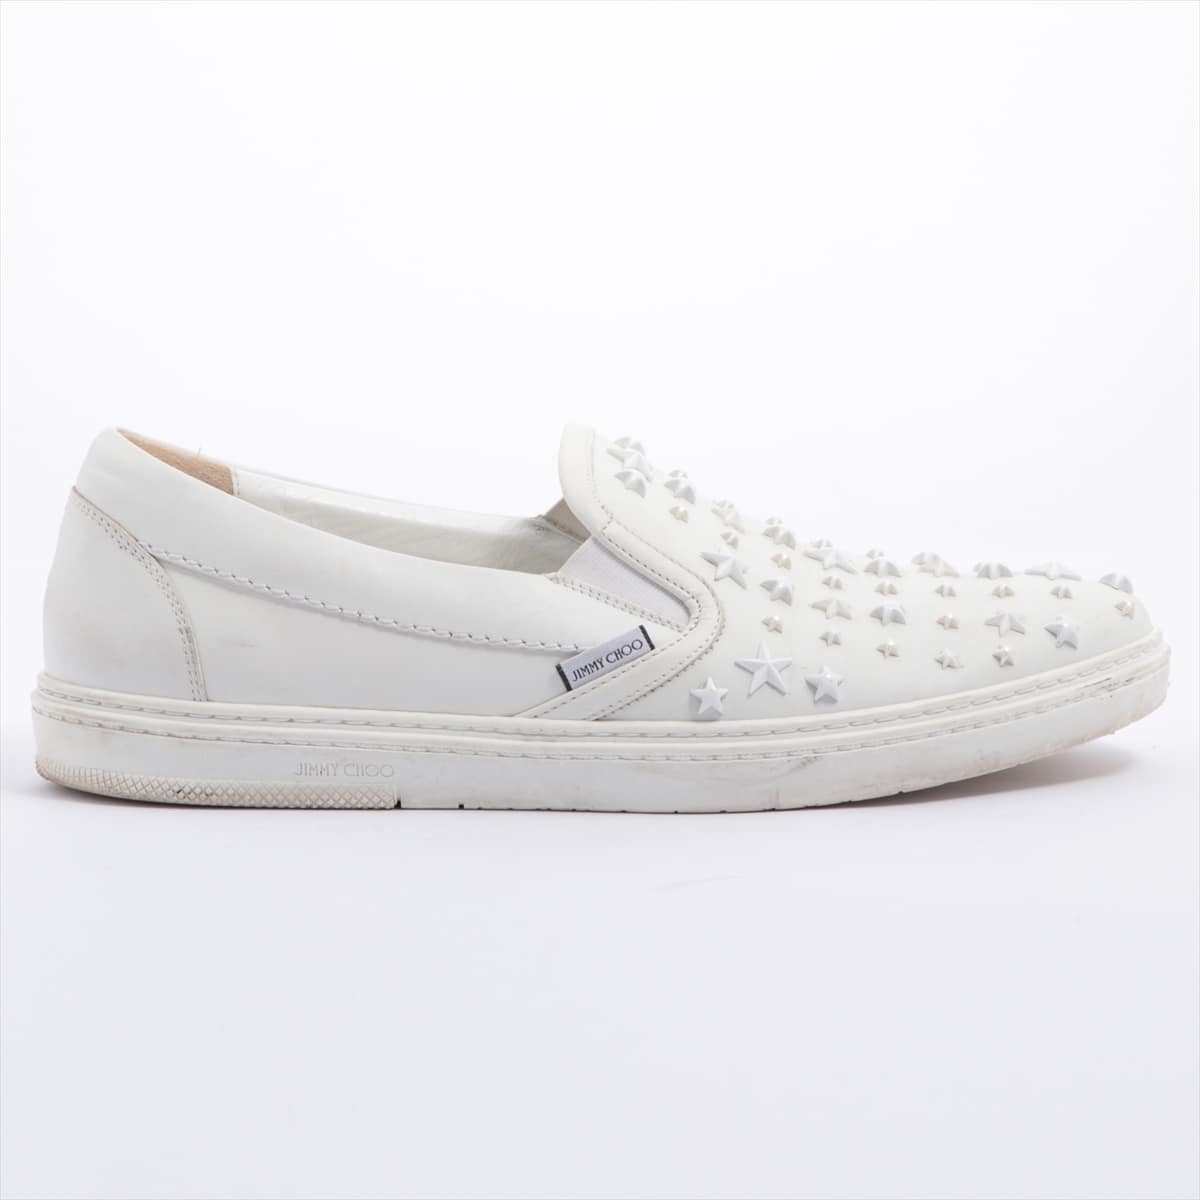 Jimmy Choo Leather Slip-on 43 Men's White Star studs Can I remove the studs